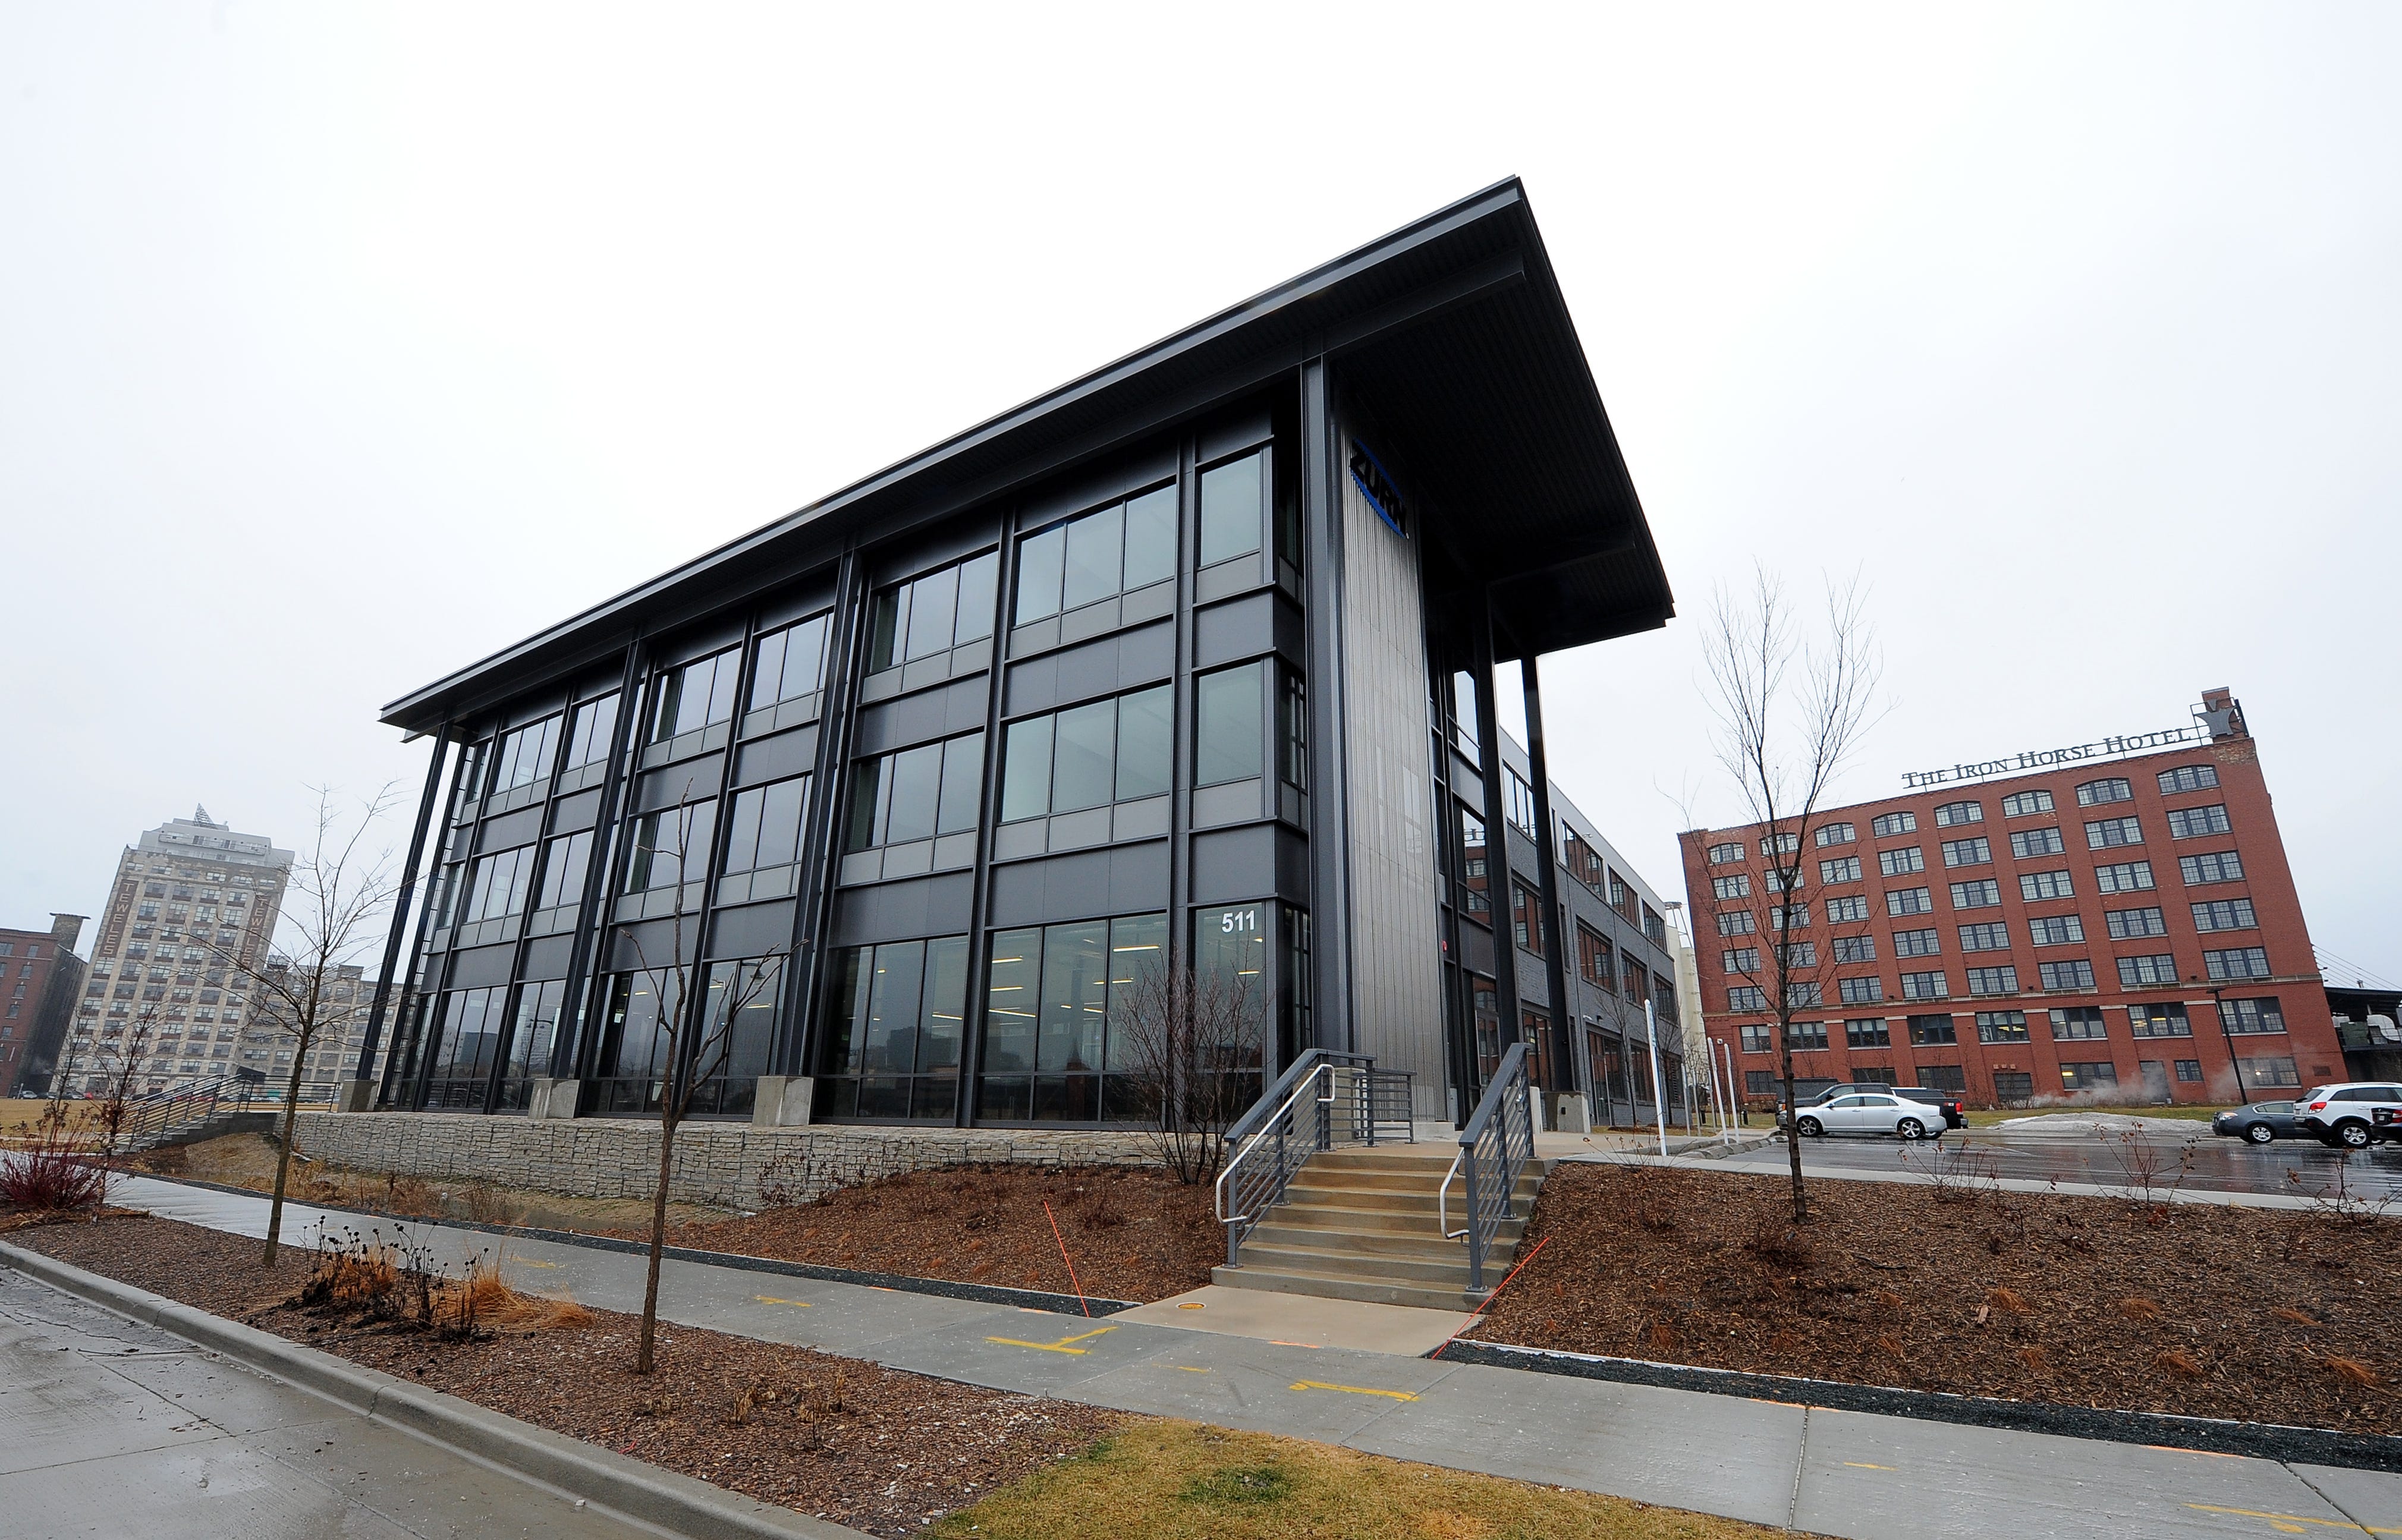 Zurn Industries LLC's headquarters is the only office building developed so far at Reed Street Yards. City officials are endorsing a financing plan for sewer work to accommodate more development there.